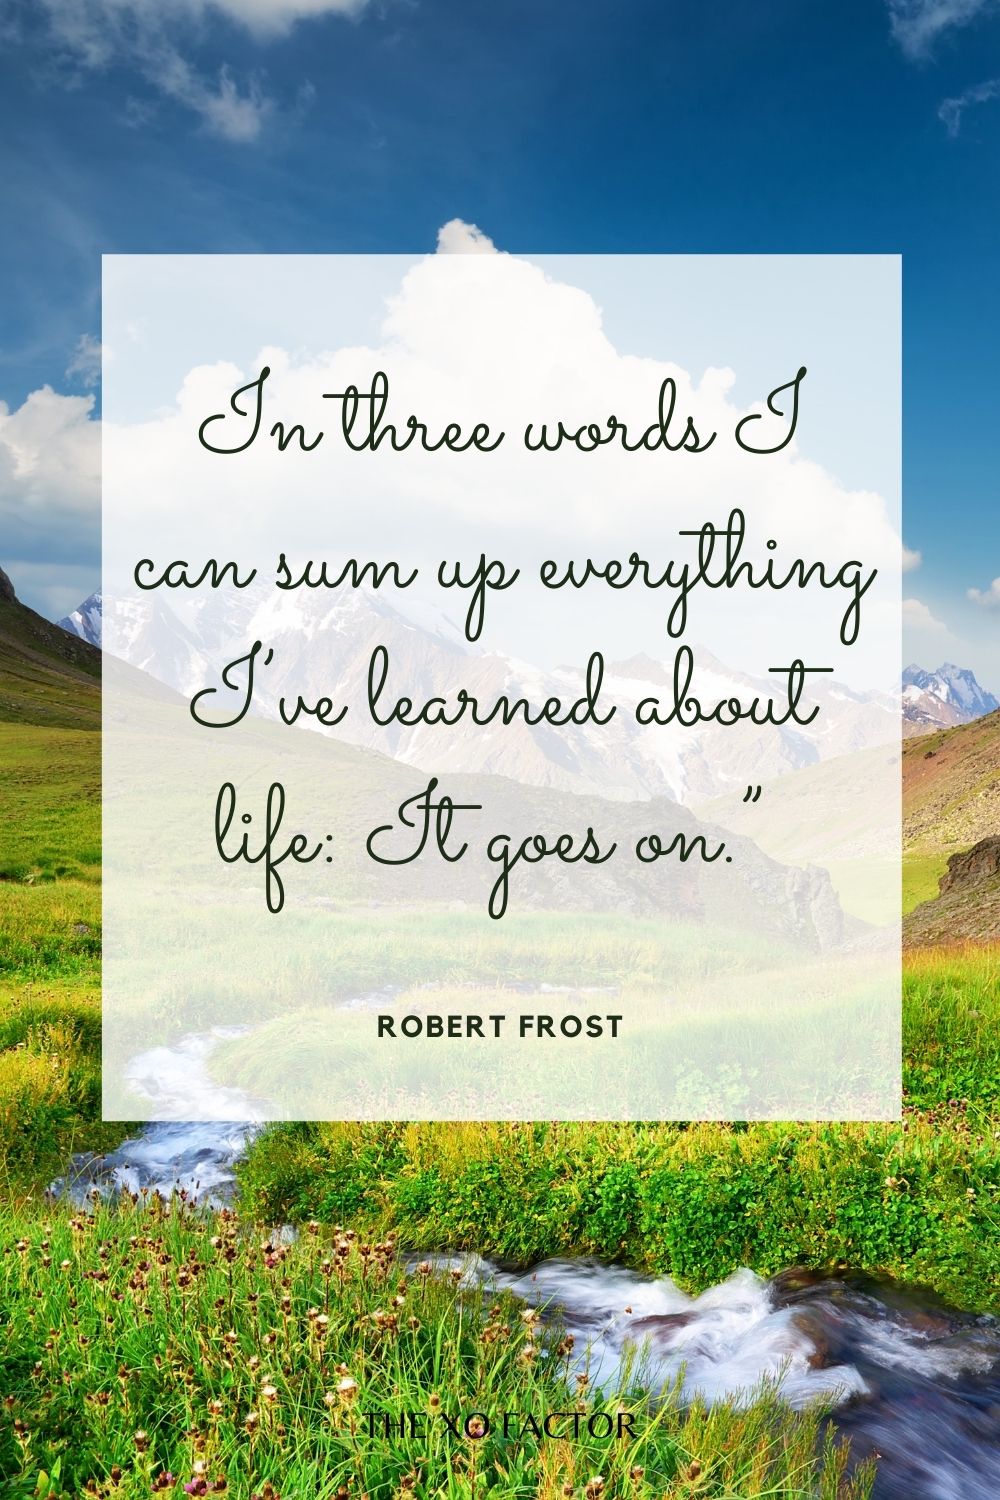 In three words I can sum up everything I’ve learned about life: It goes on.”  Robert Frost